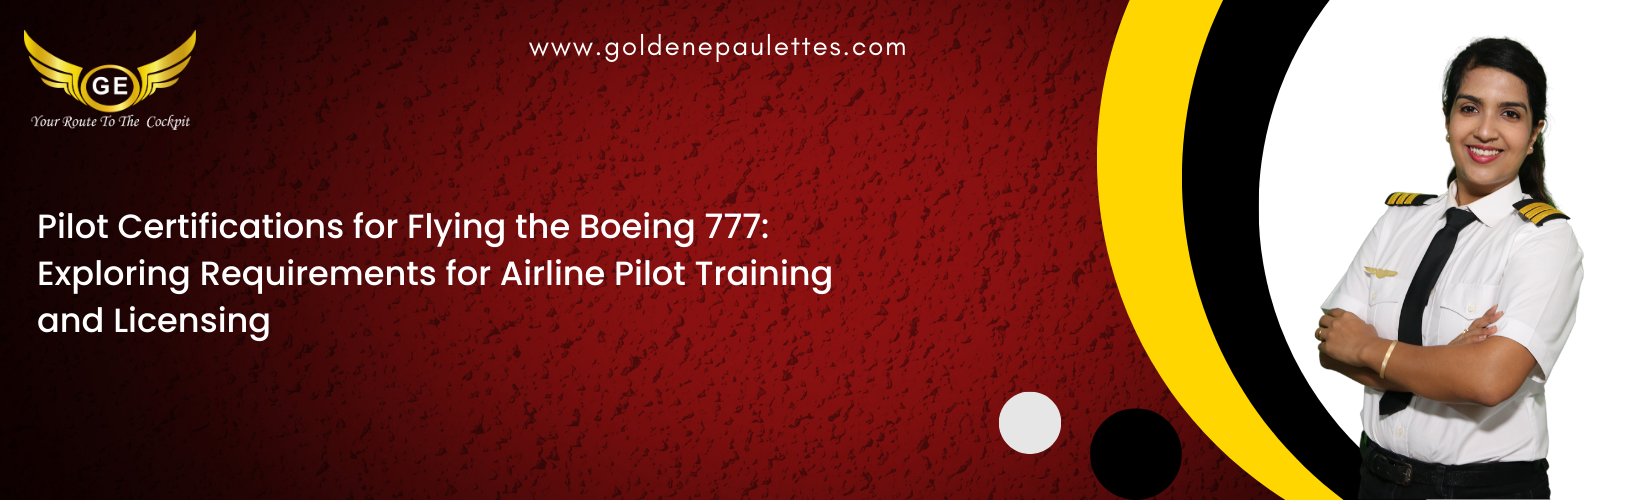 The Boeing 777 and Pilot Certifications